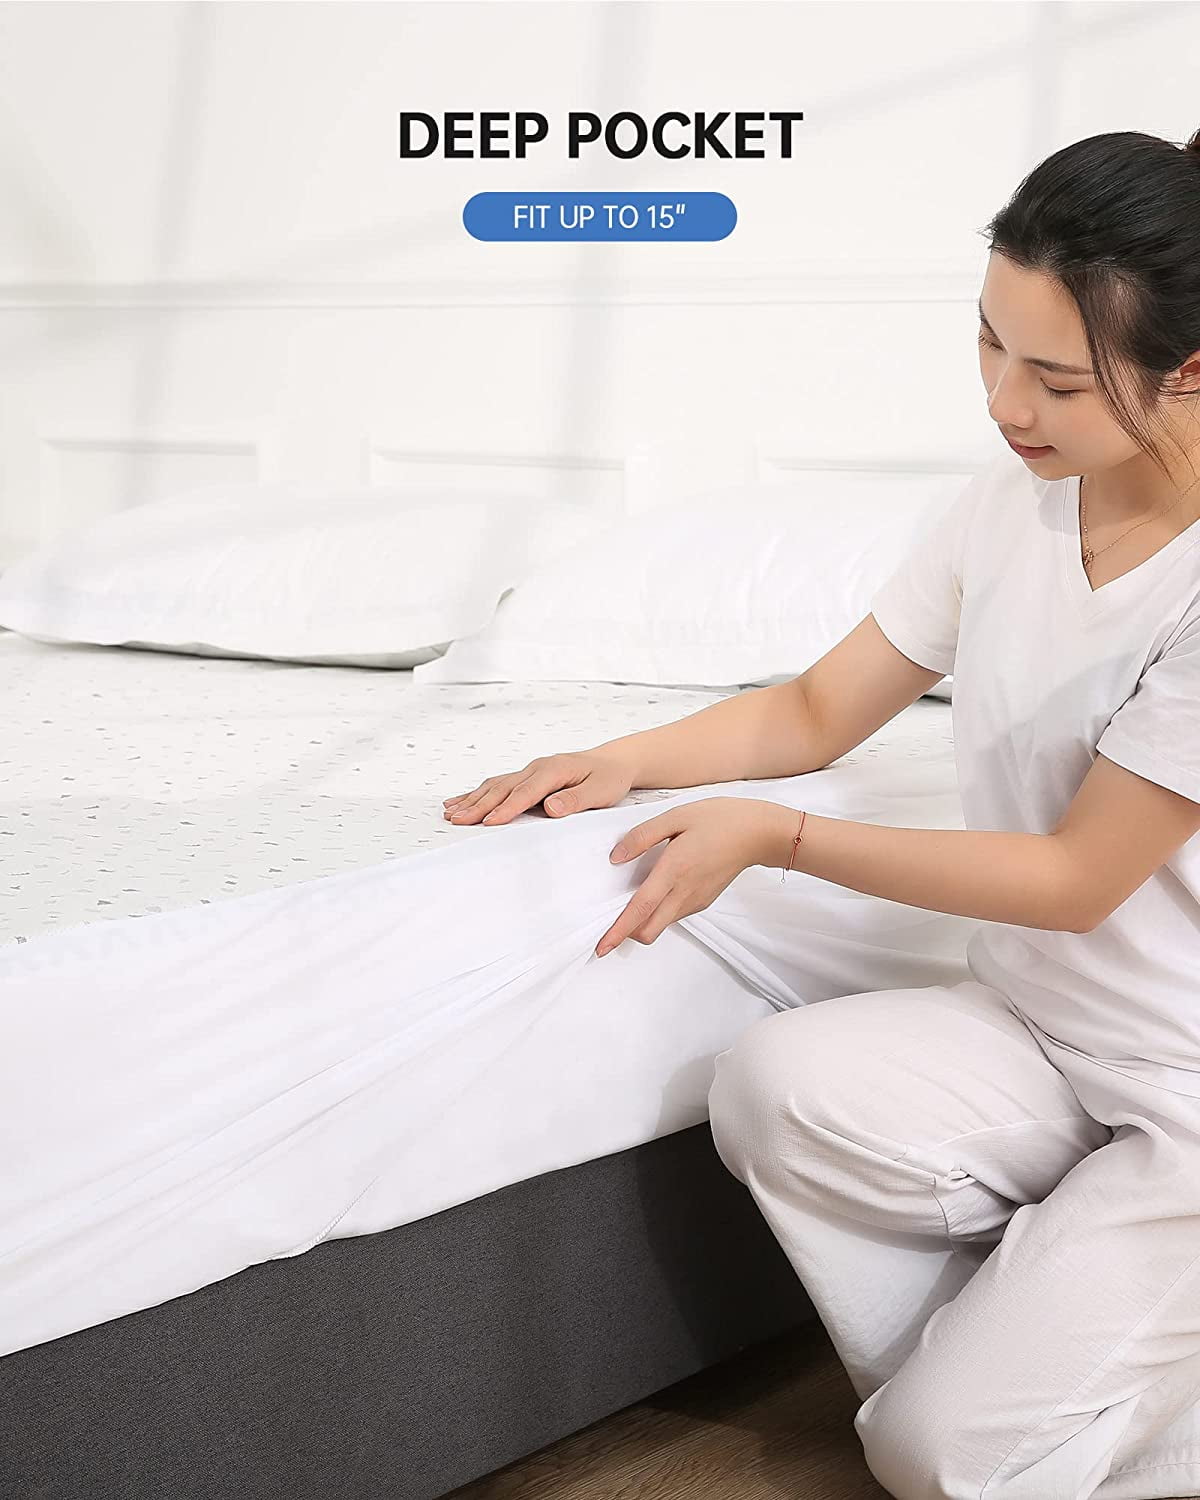 Hermell Convoluted Mattress Pad Economy - Blue - Hospital Size 34 x 72 x 1-3/4 in. CP5220